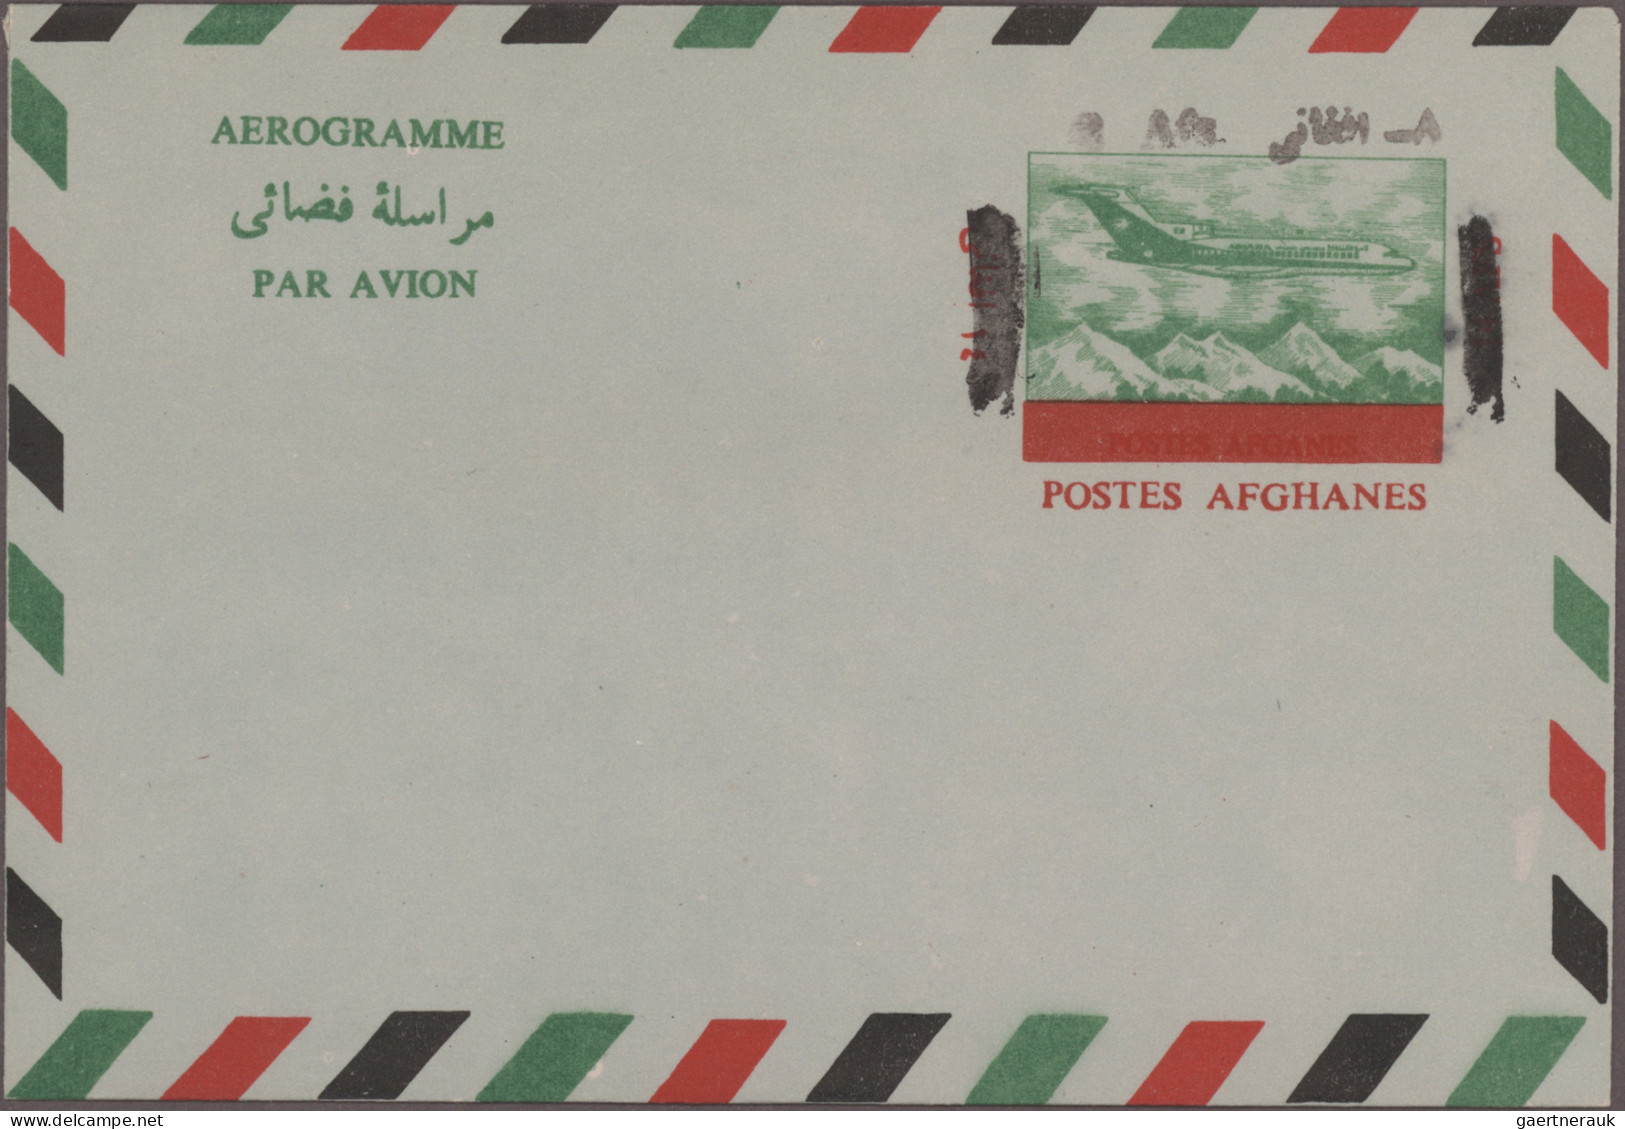 Afghanistan - postal stationery: 1915-modern: Collection of more than 50 postal